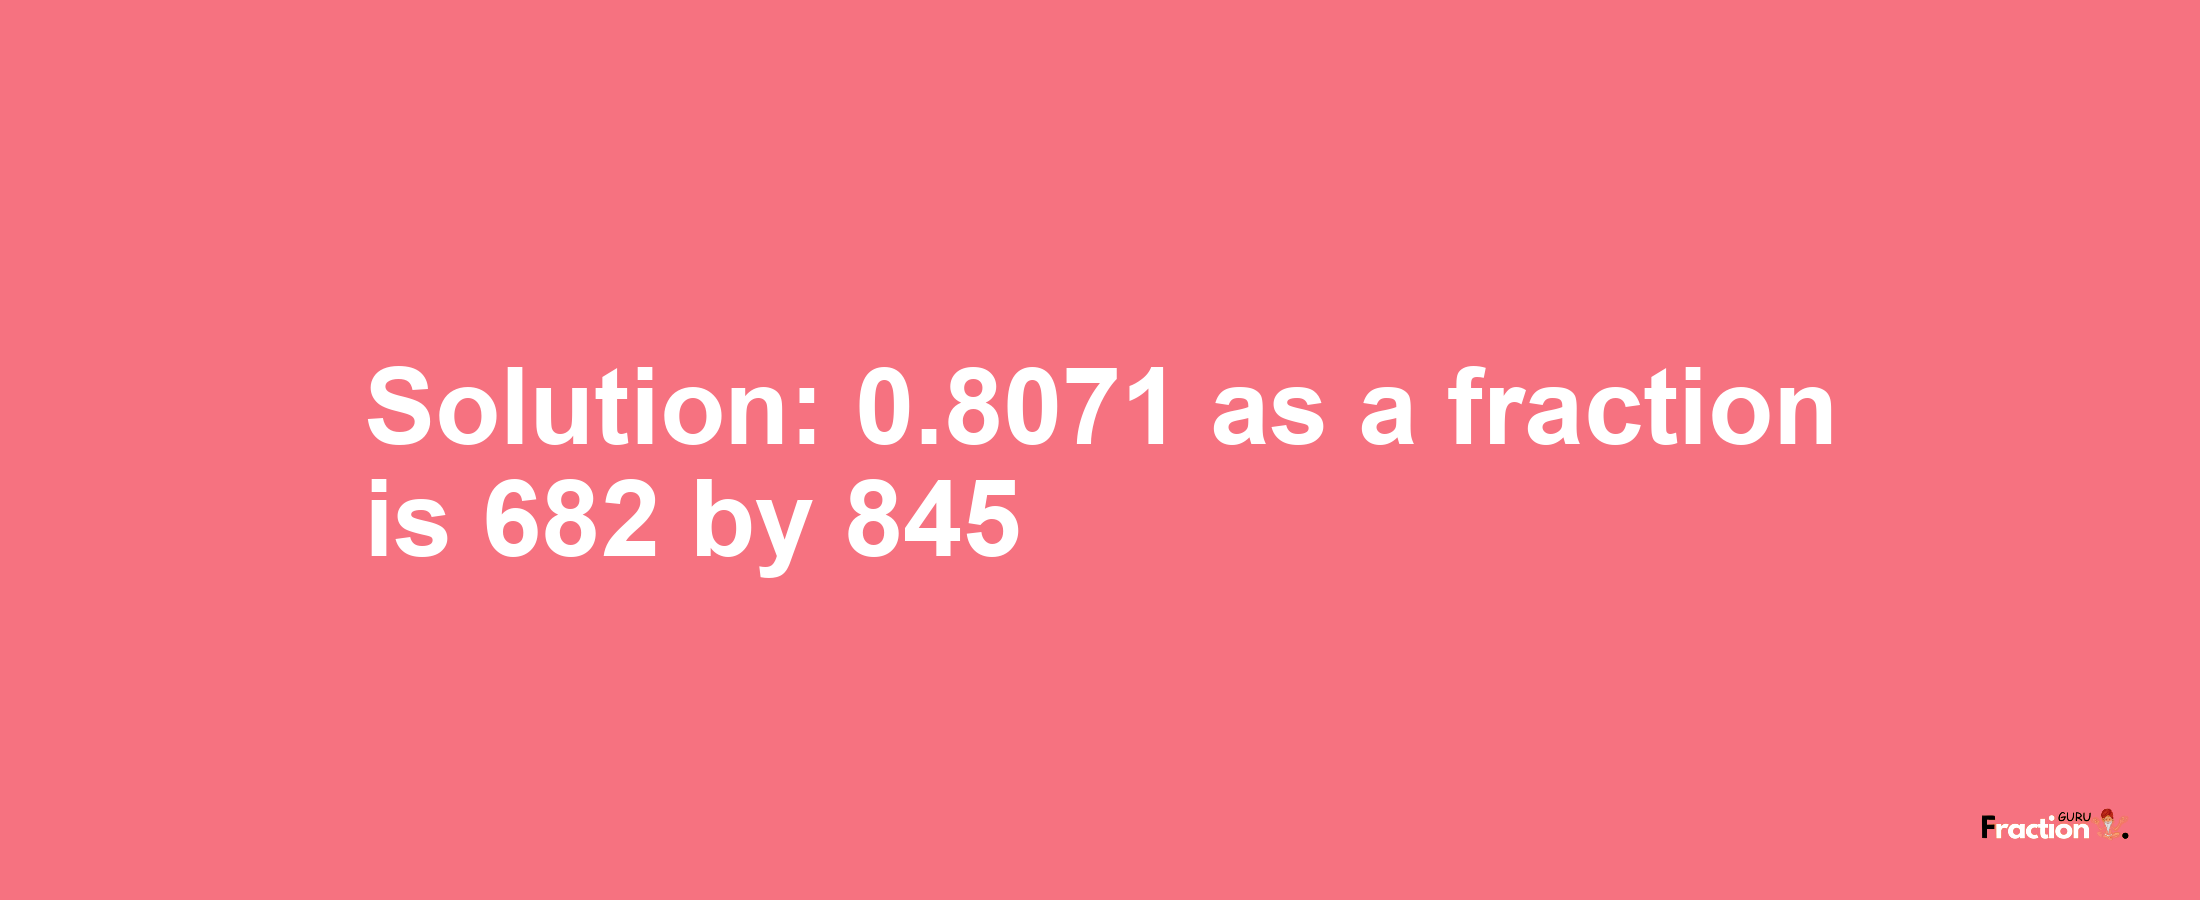 Solution:0.8071 as a fraction is 682/845